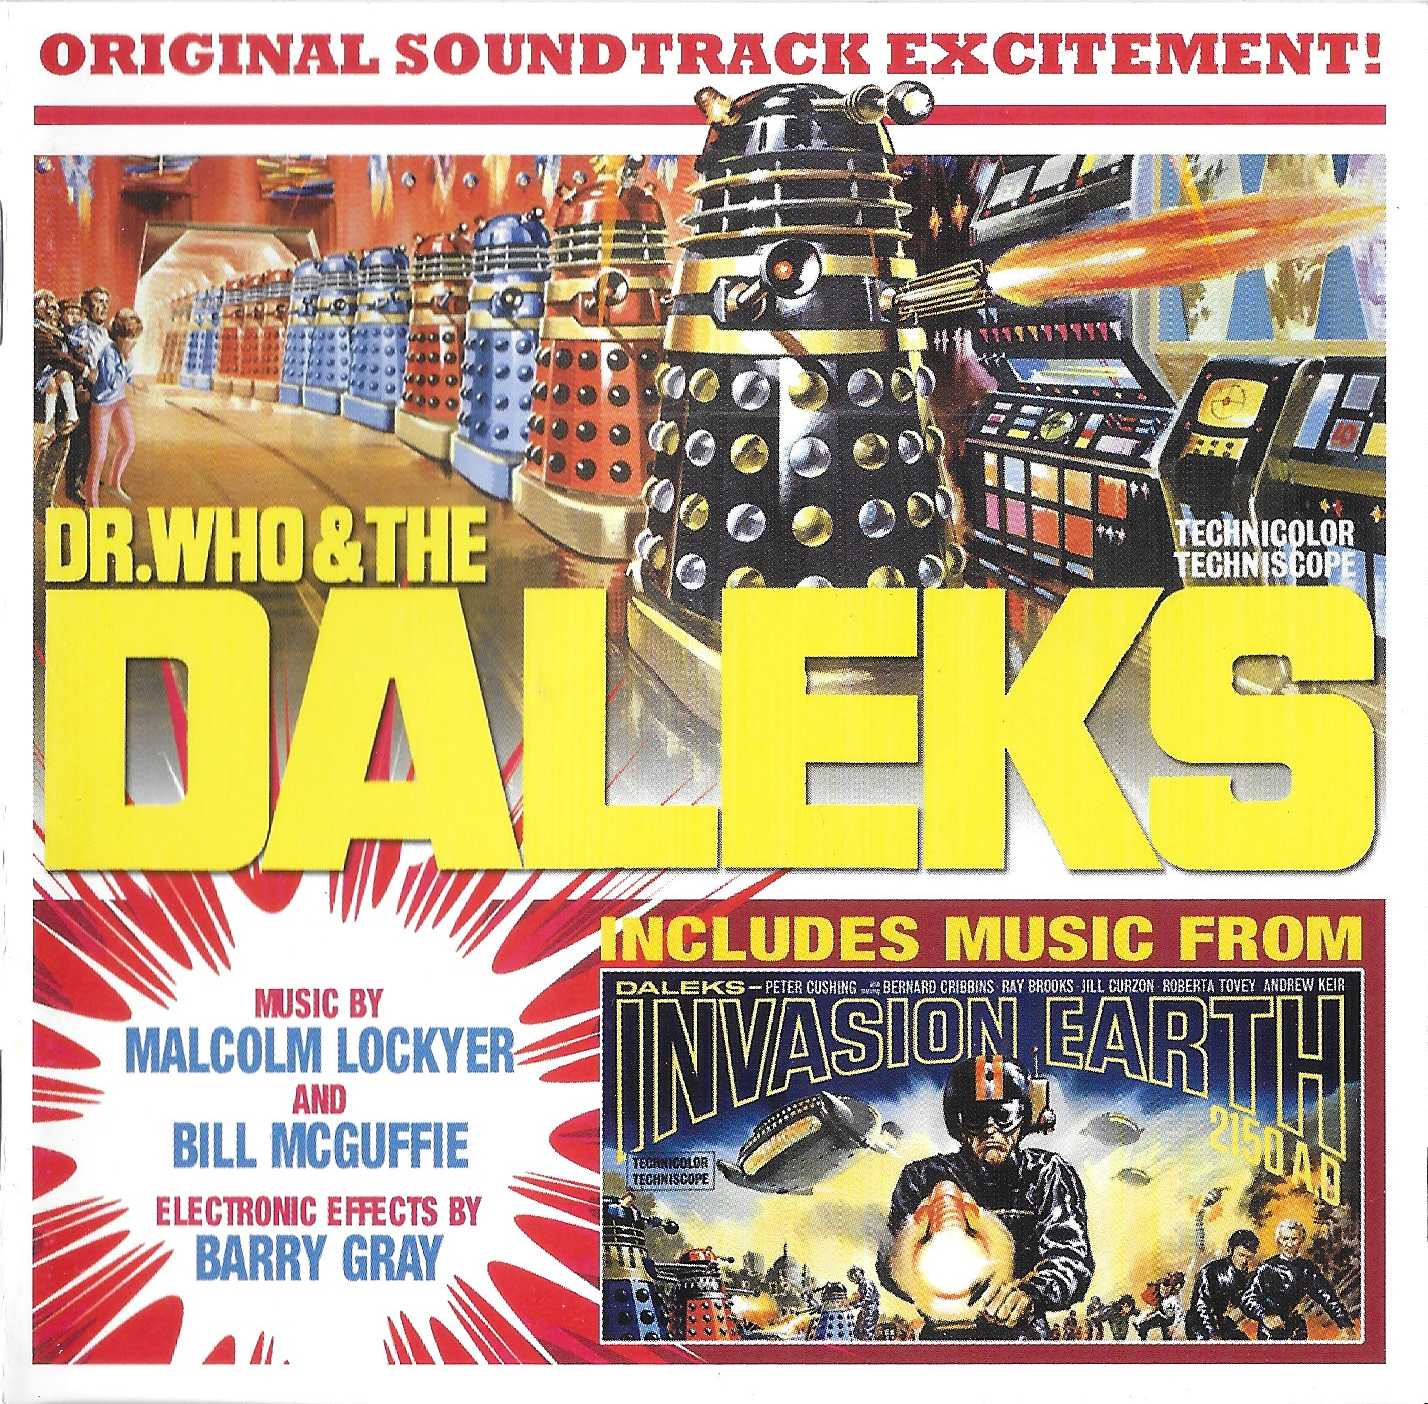 Picture of Doctor Who and the Daleks / Daleks invasion Earth 2150 AD by artist Malcolm Lockyer / Bill McGuffie / Barry Gray from the BBC cds - Records and Tapes library